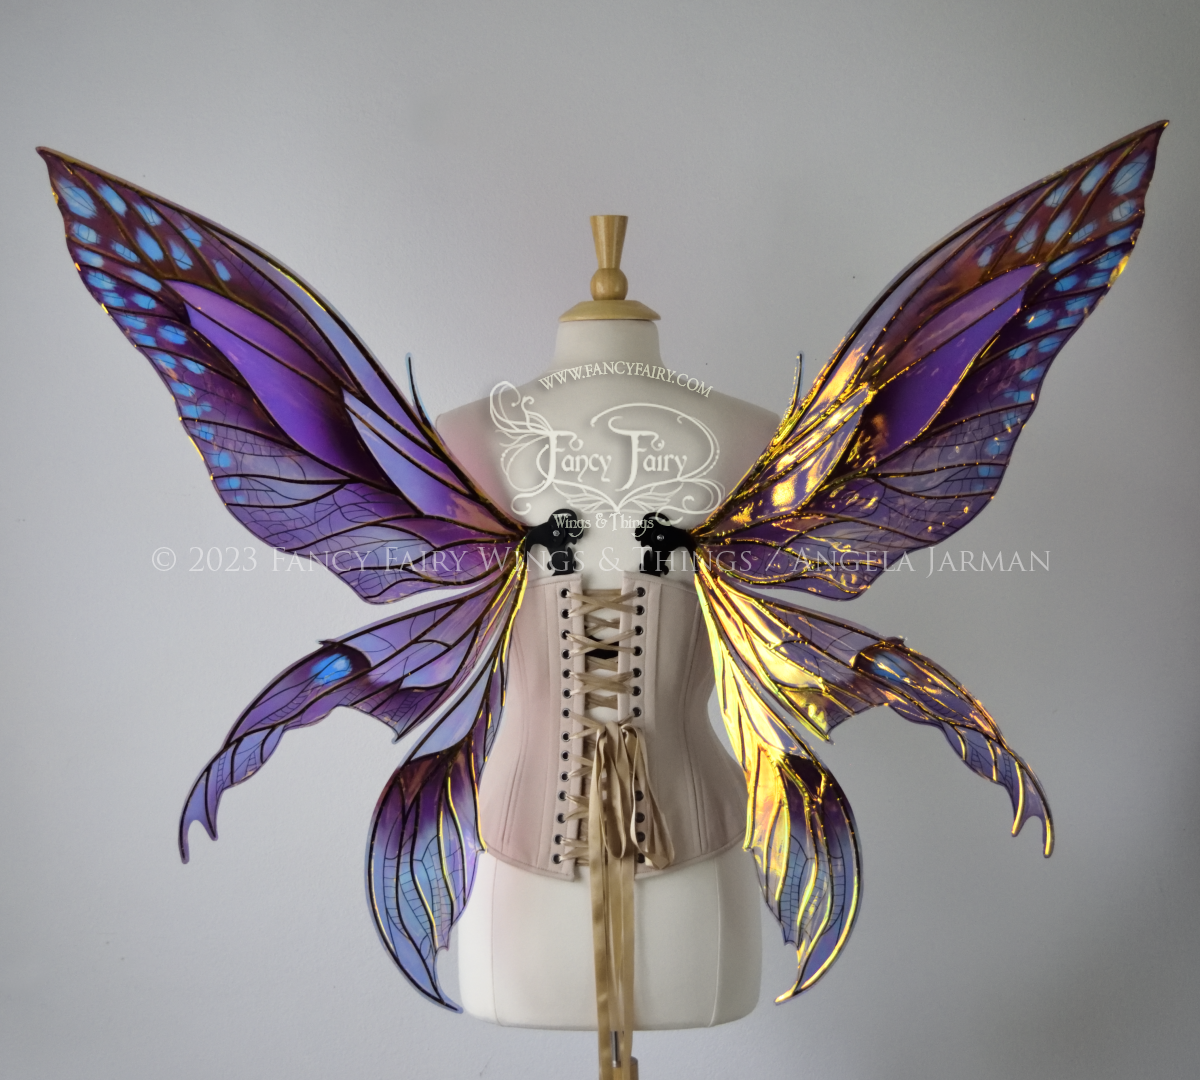 Back view of large burgundy and peach pink iridescent fairy wings with 3 panels on each side, pointed tips, lots of vein detail, worn on a dress form.